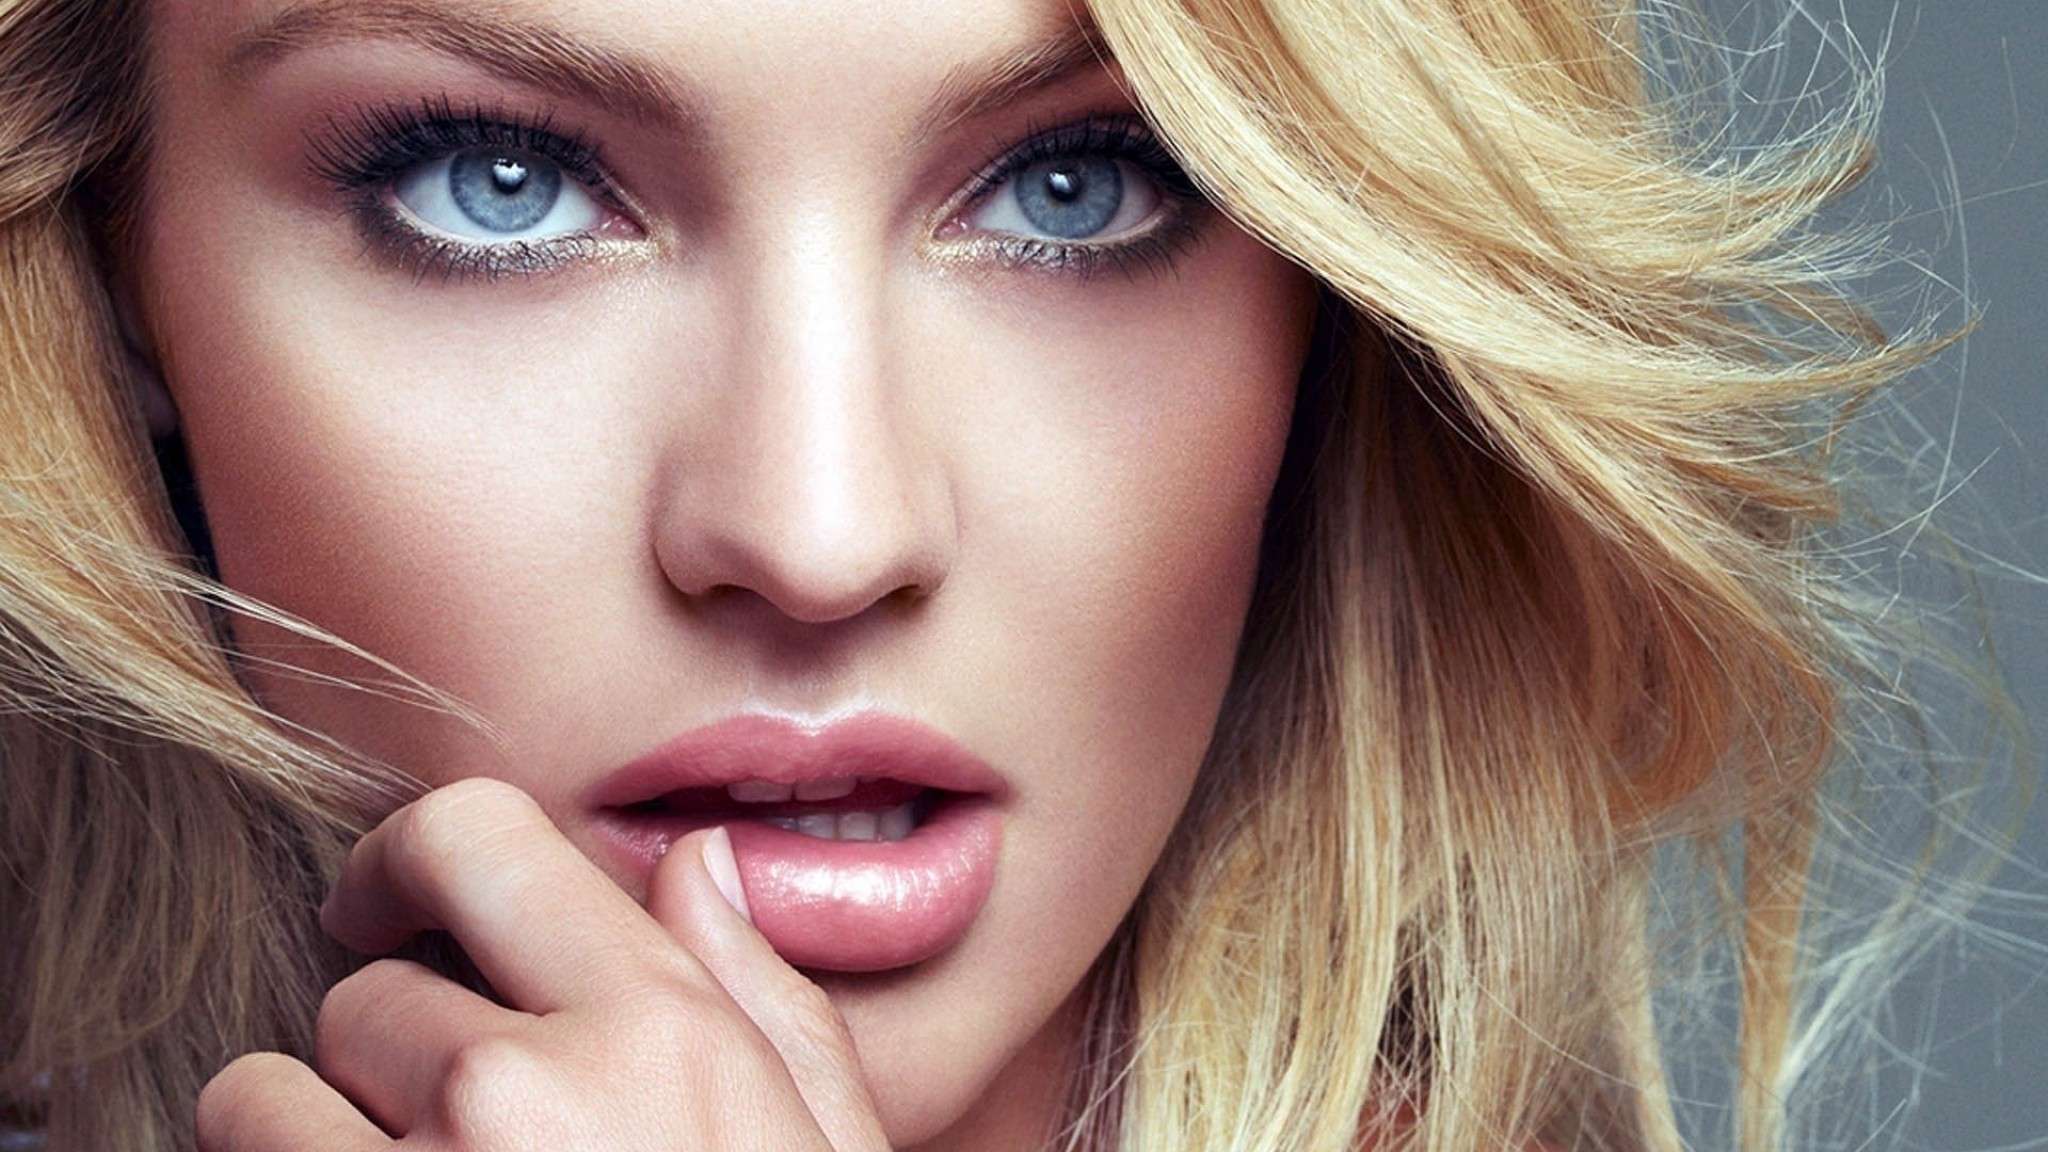 Wallpaper Candice Swanepoel HD Widescreen Upload At